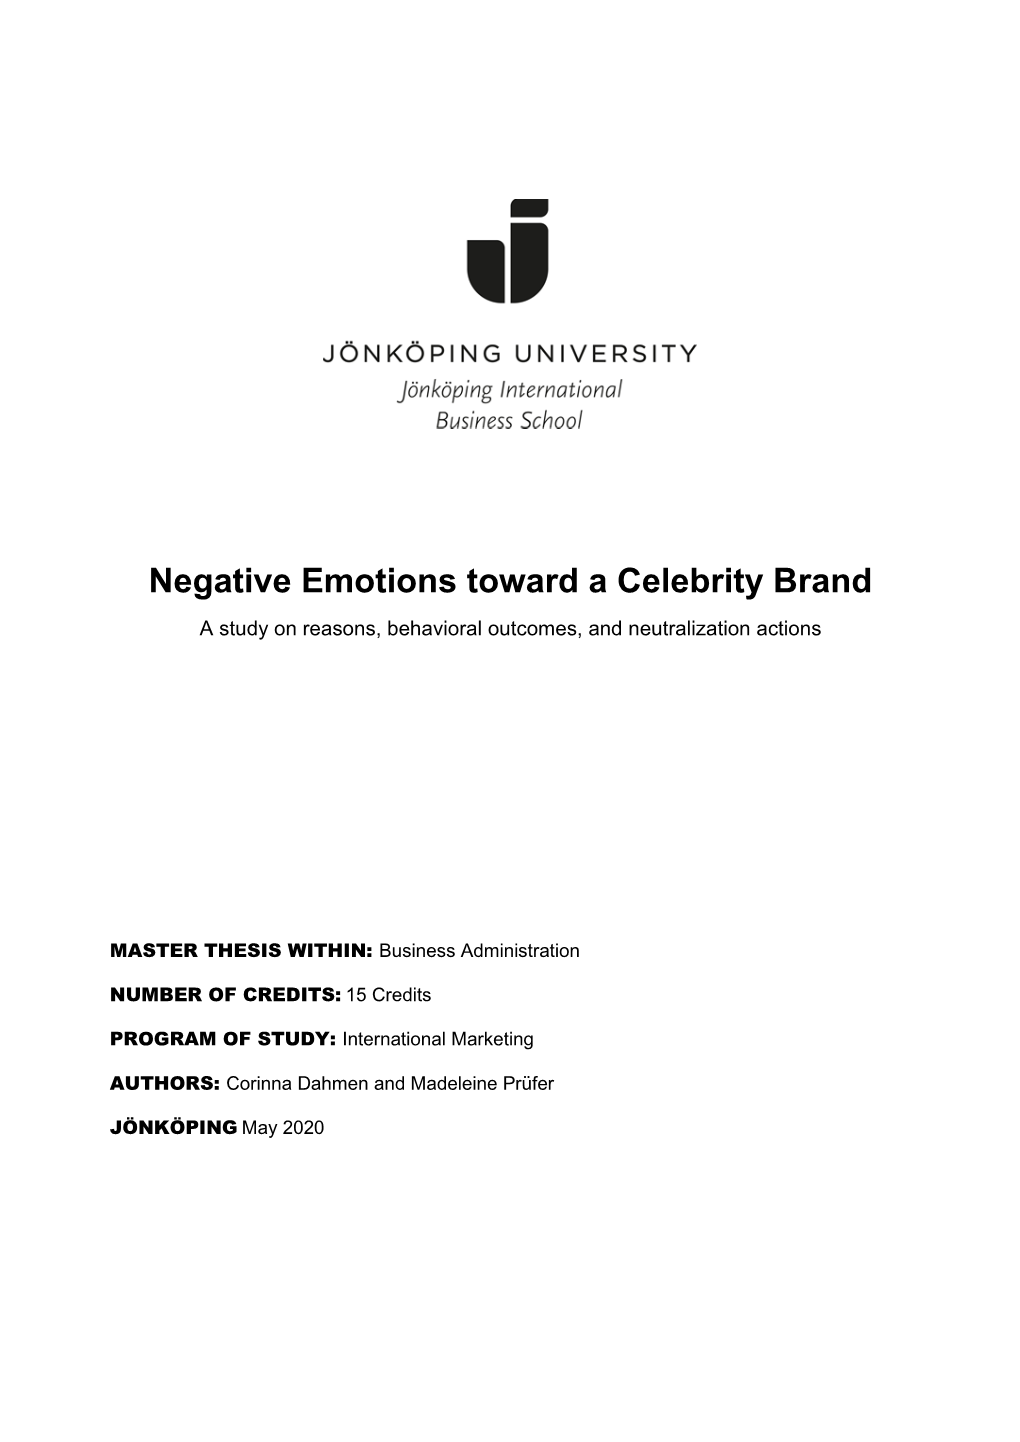 Negative Emotions Toward a Celebrity Brand a Study on Reasons, Behavioral Outcomes, and Neutralization Actions